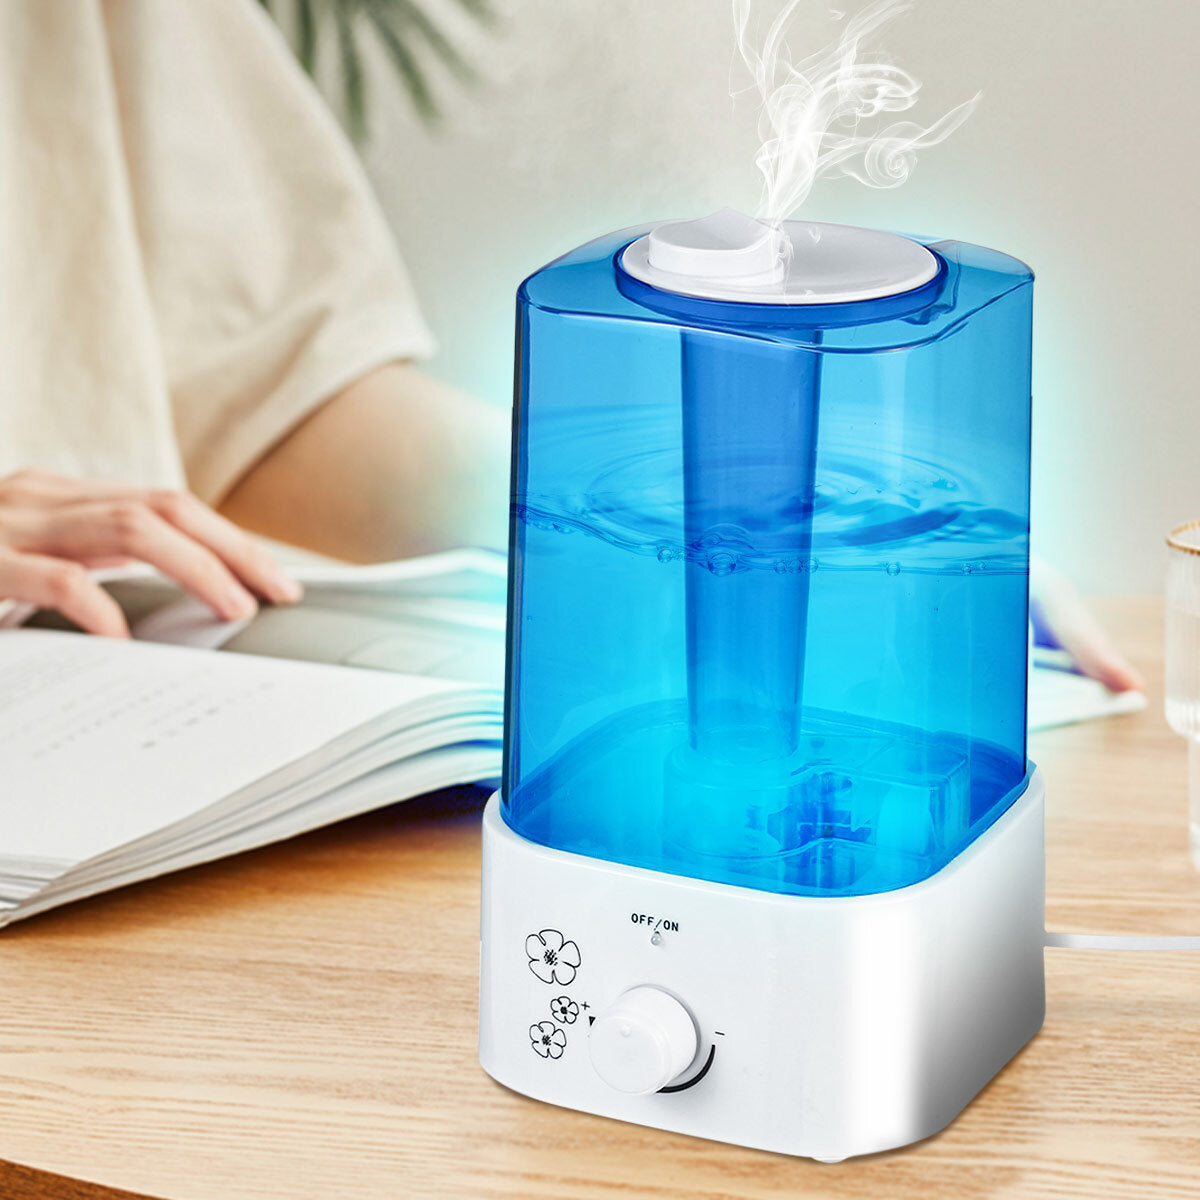 2L Ultrasonic Air Humidifier Purifier Silent Aroma Diffuser Mist Maker Office Home 220V